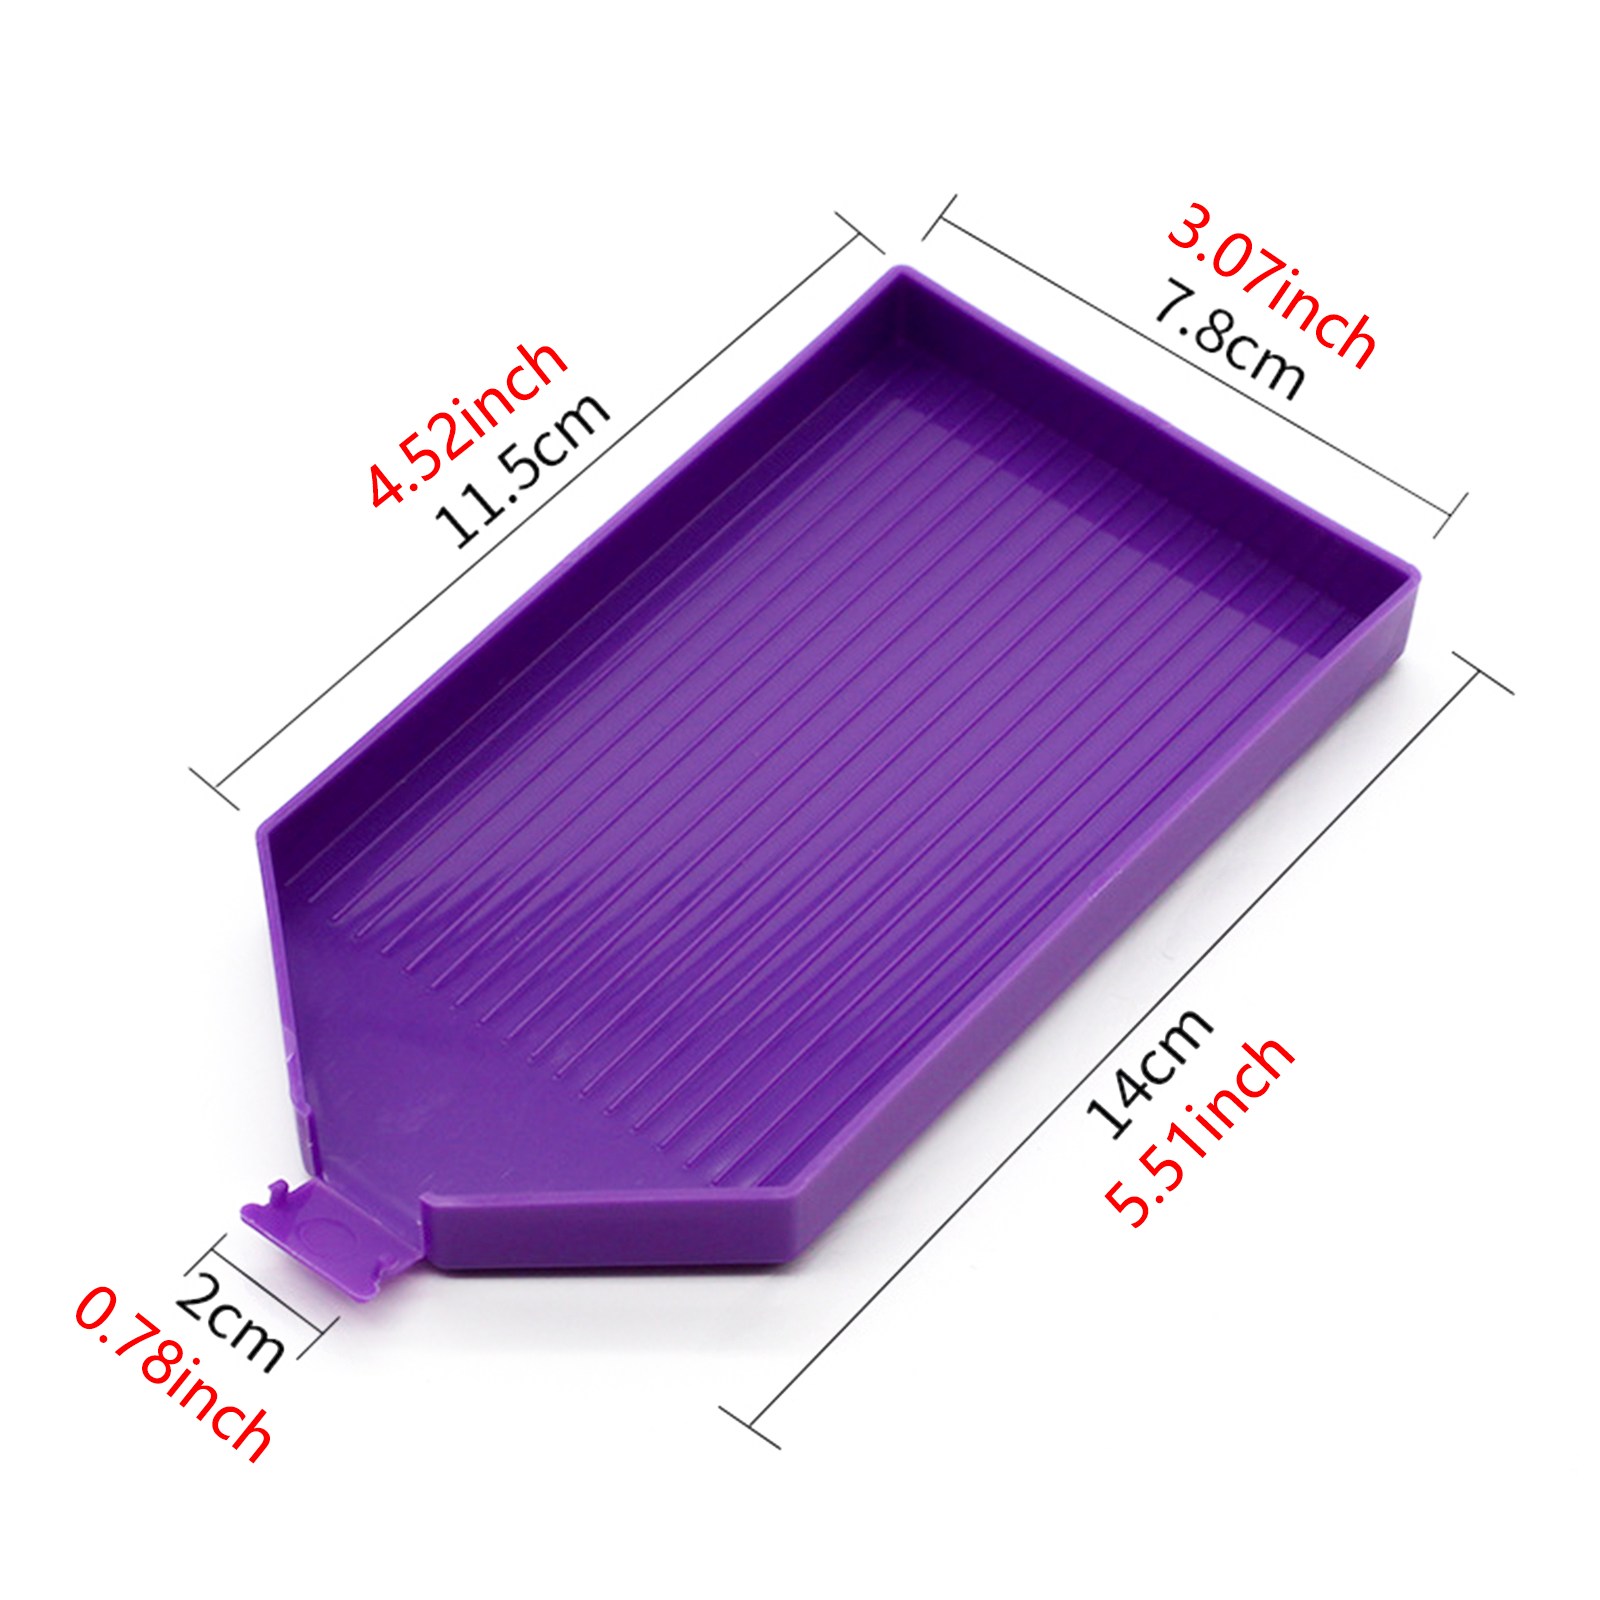  5 Pcs Large Diamond Painting Trays,Plastic Bead Sorting  Tray,Big Diamond Art Trays Kit Tools, Storage Containers Tray for  Rhinestone and Accessories(5 Trays,1 Spoon) : Arts, Crafts & Sewing